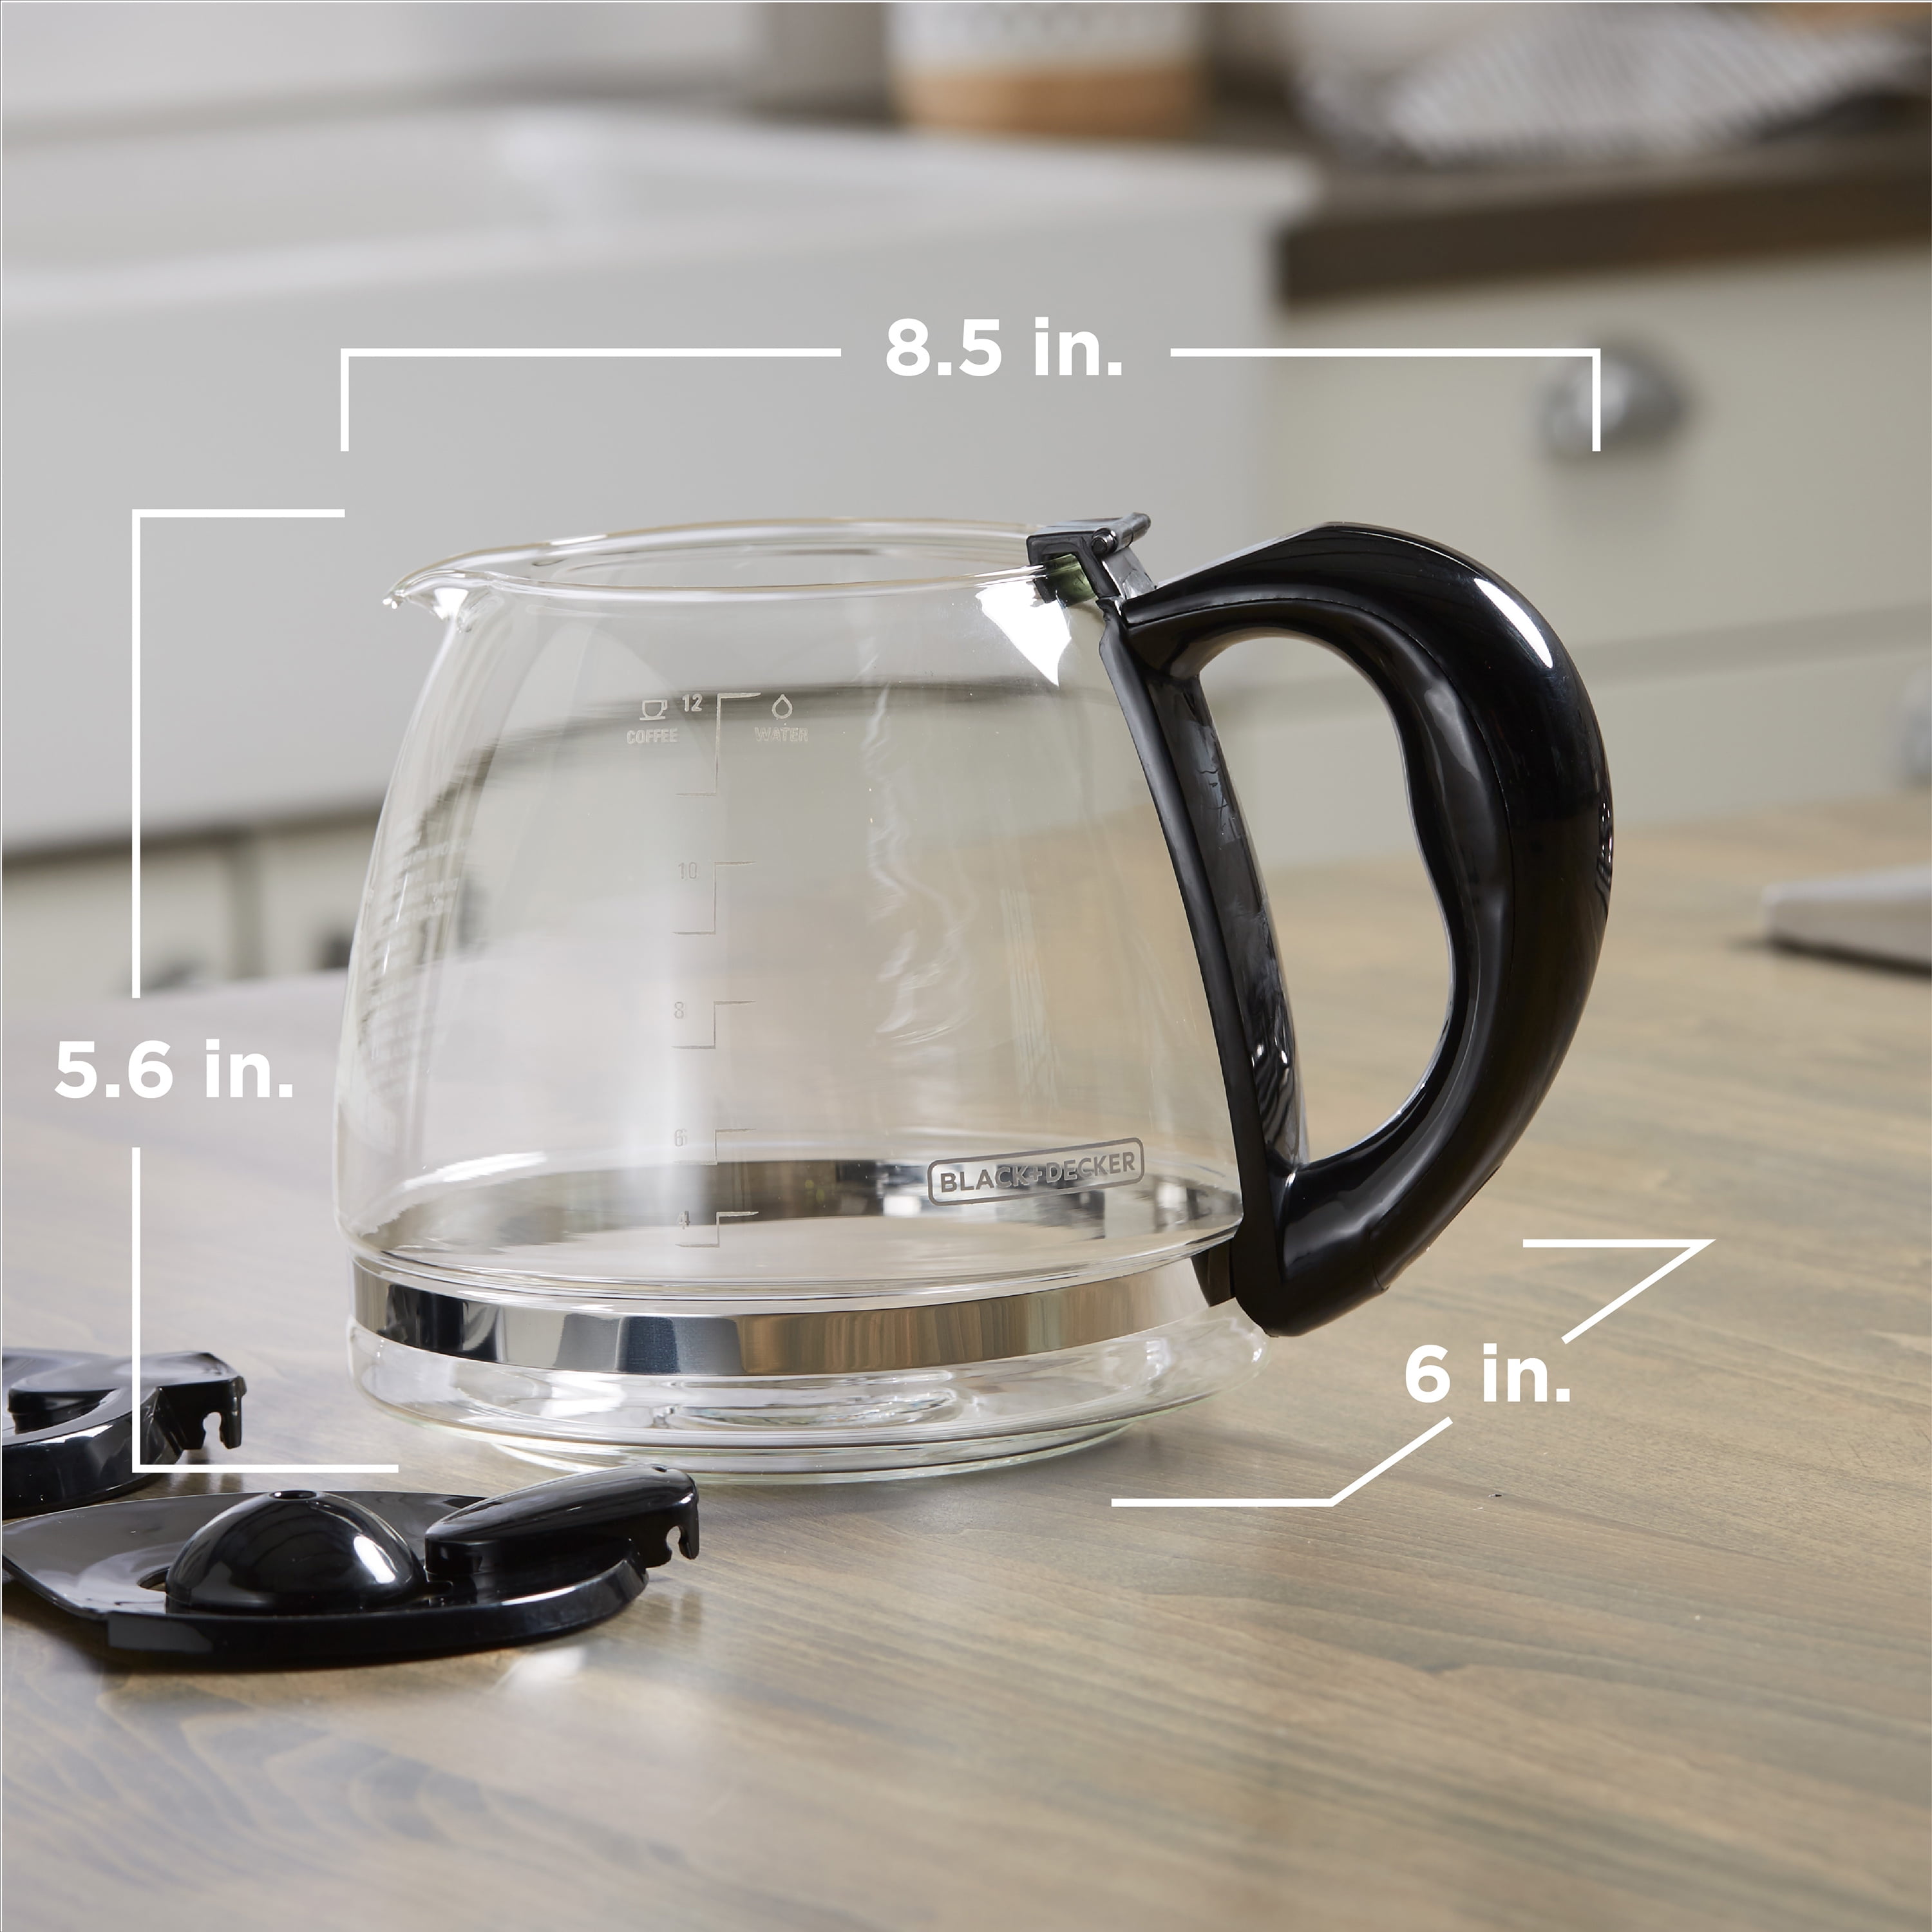 Buy a Replacement Carafe for your Coffee Maker, GC2000B